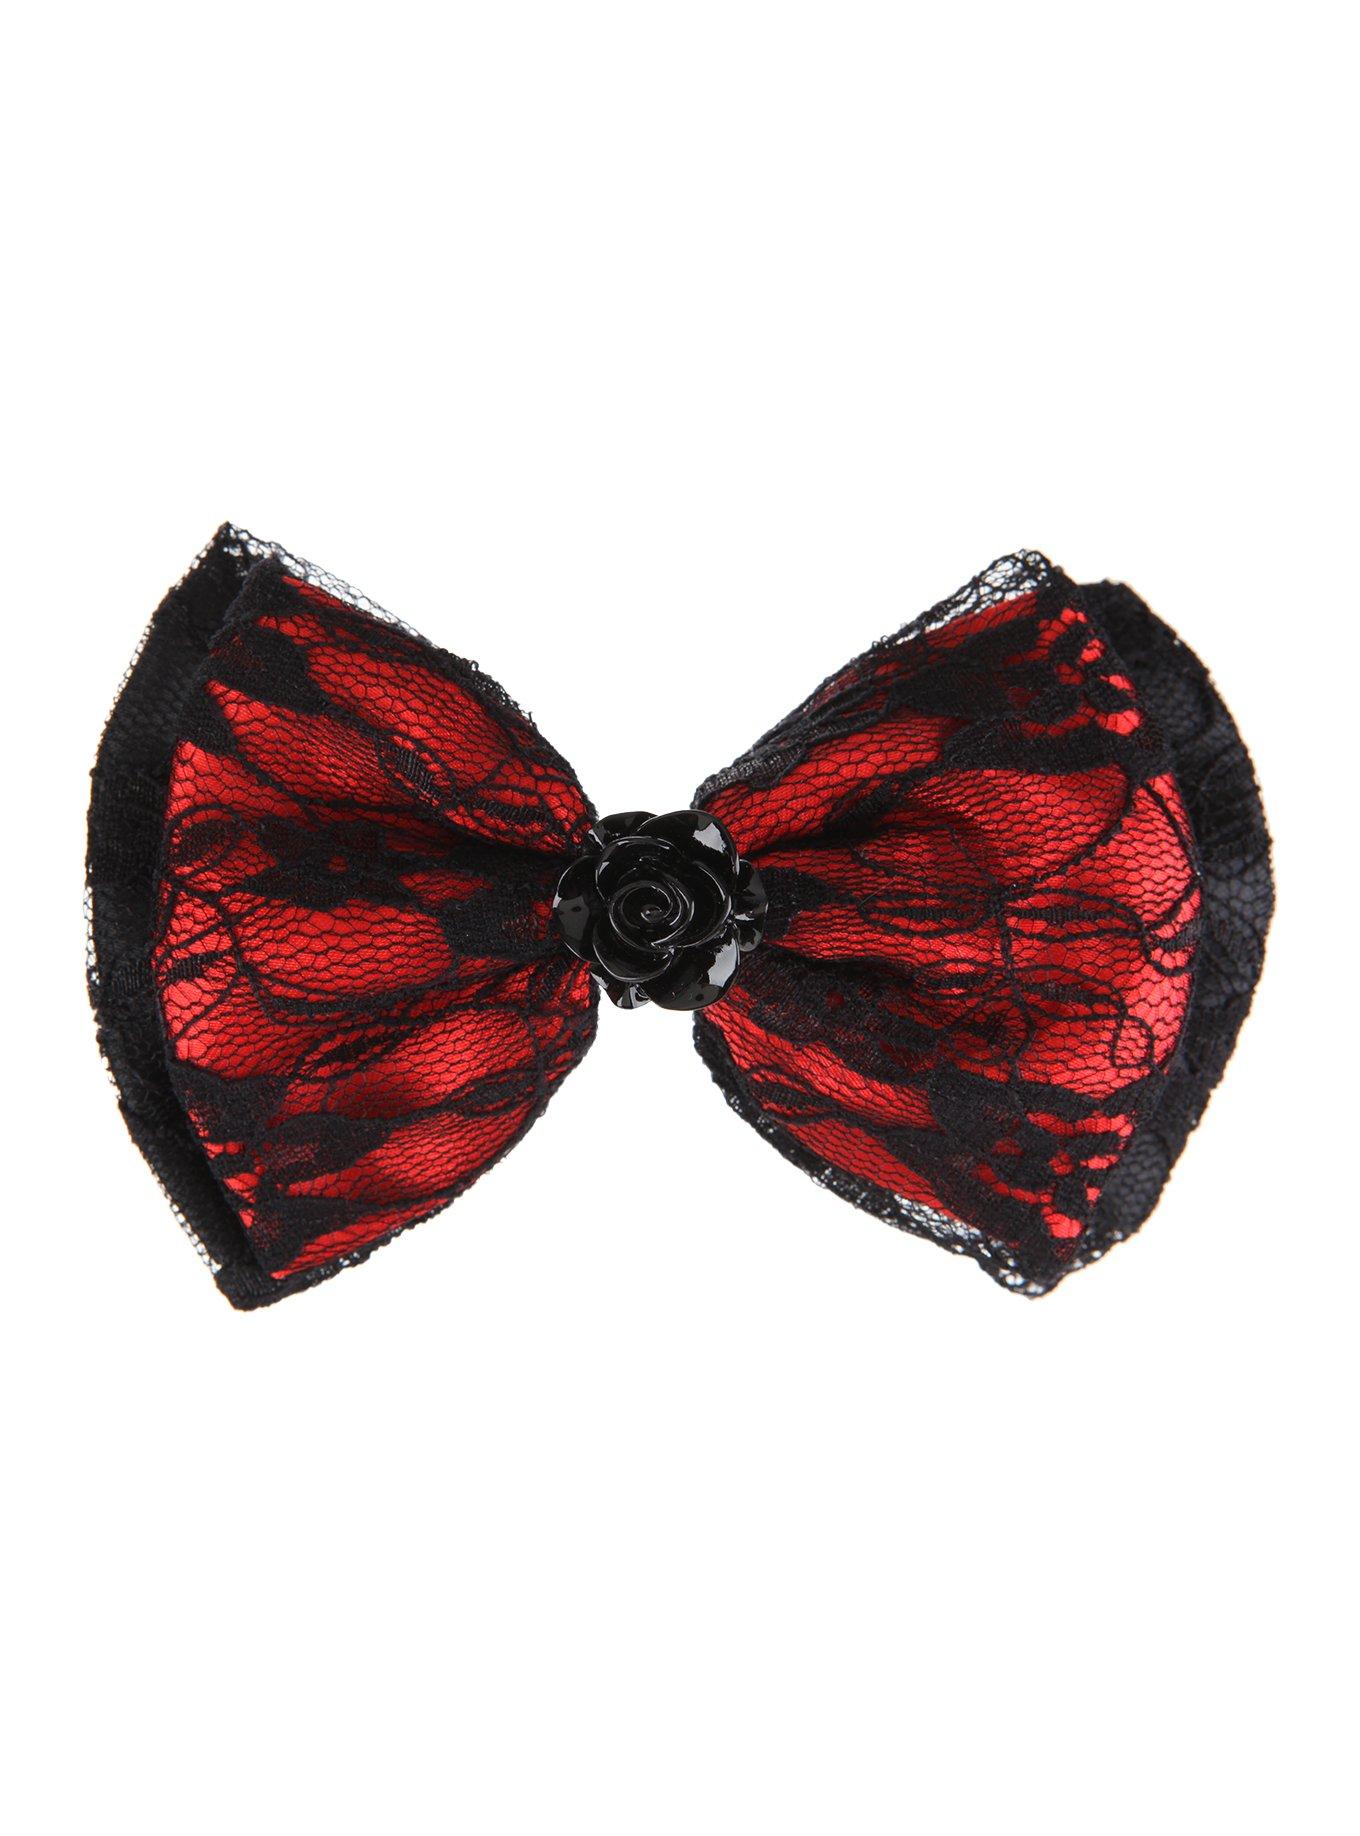 Black & Red Lace Rose Hair Bow, , hi-res